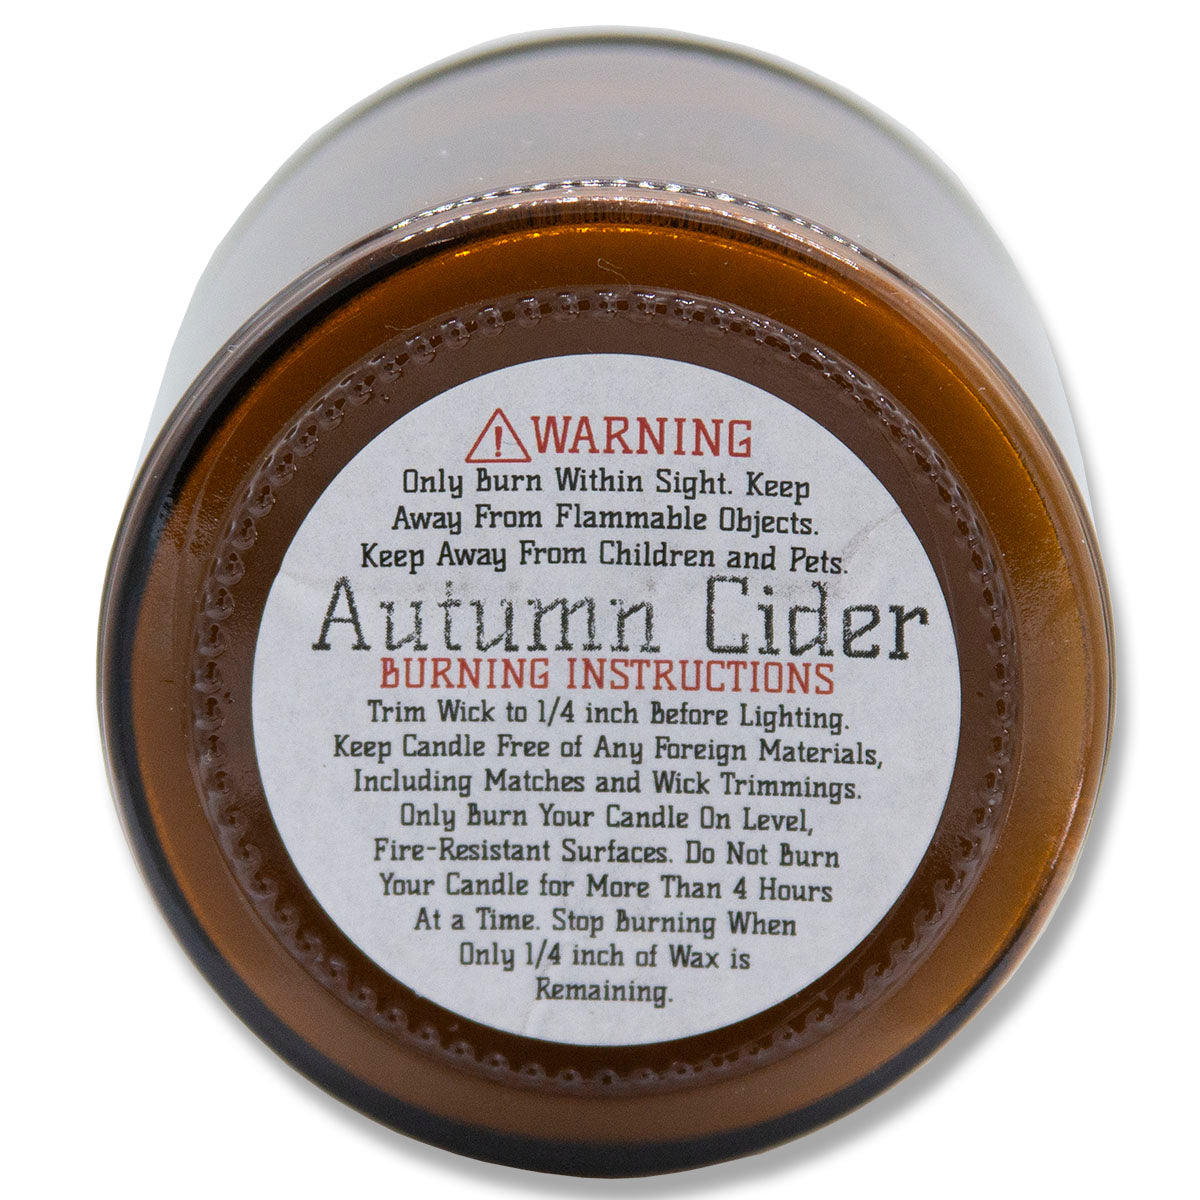 Autumn Cider, Lone Star Candles & More's Premium Hand Poured Strongly Scented Soy Wax Gift Candle, Fall Spices, Sweet Musk, & A Hint of Pineapple, US Made in Texas, Amber Glass Jar 9oz Happy Birthday